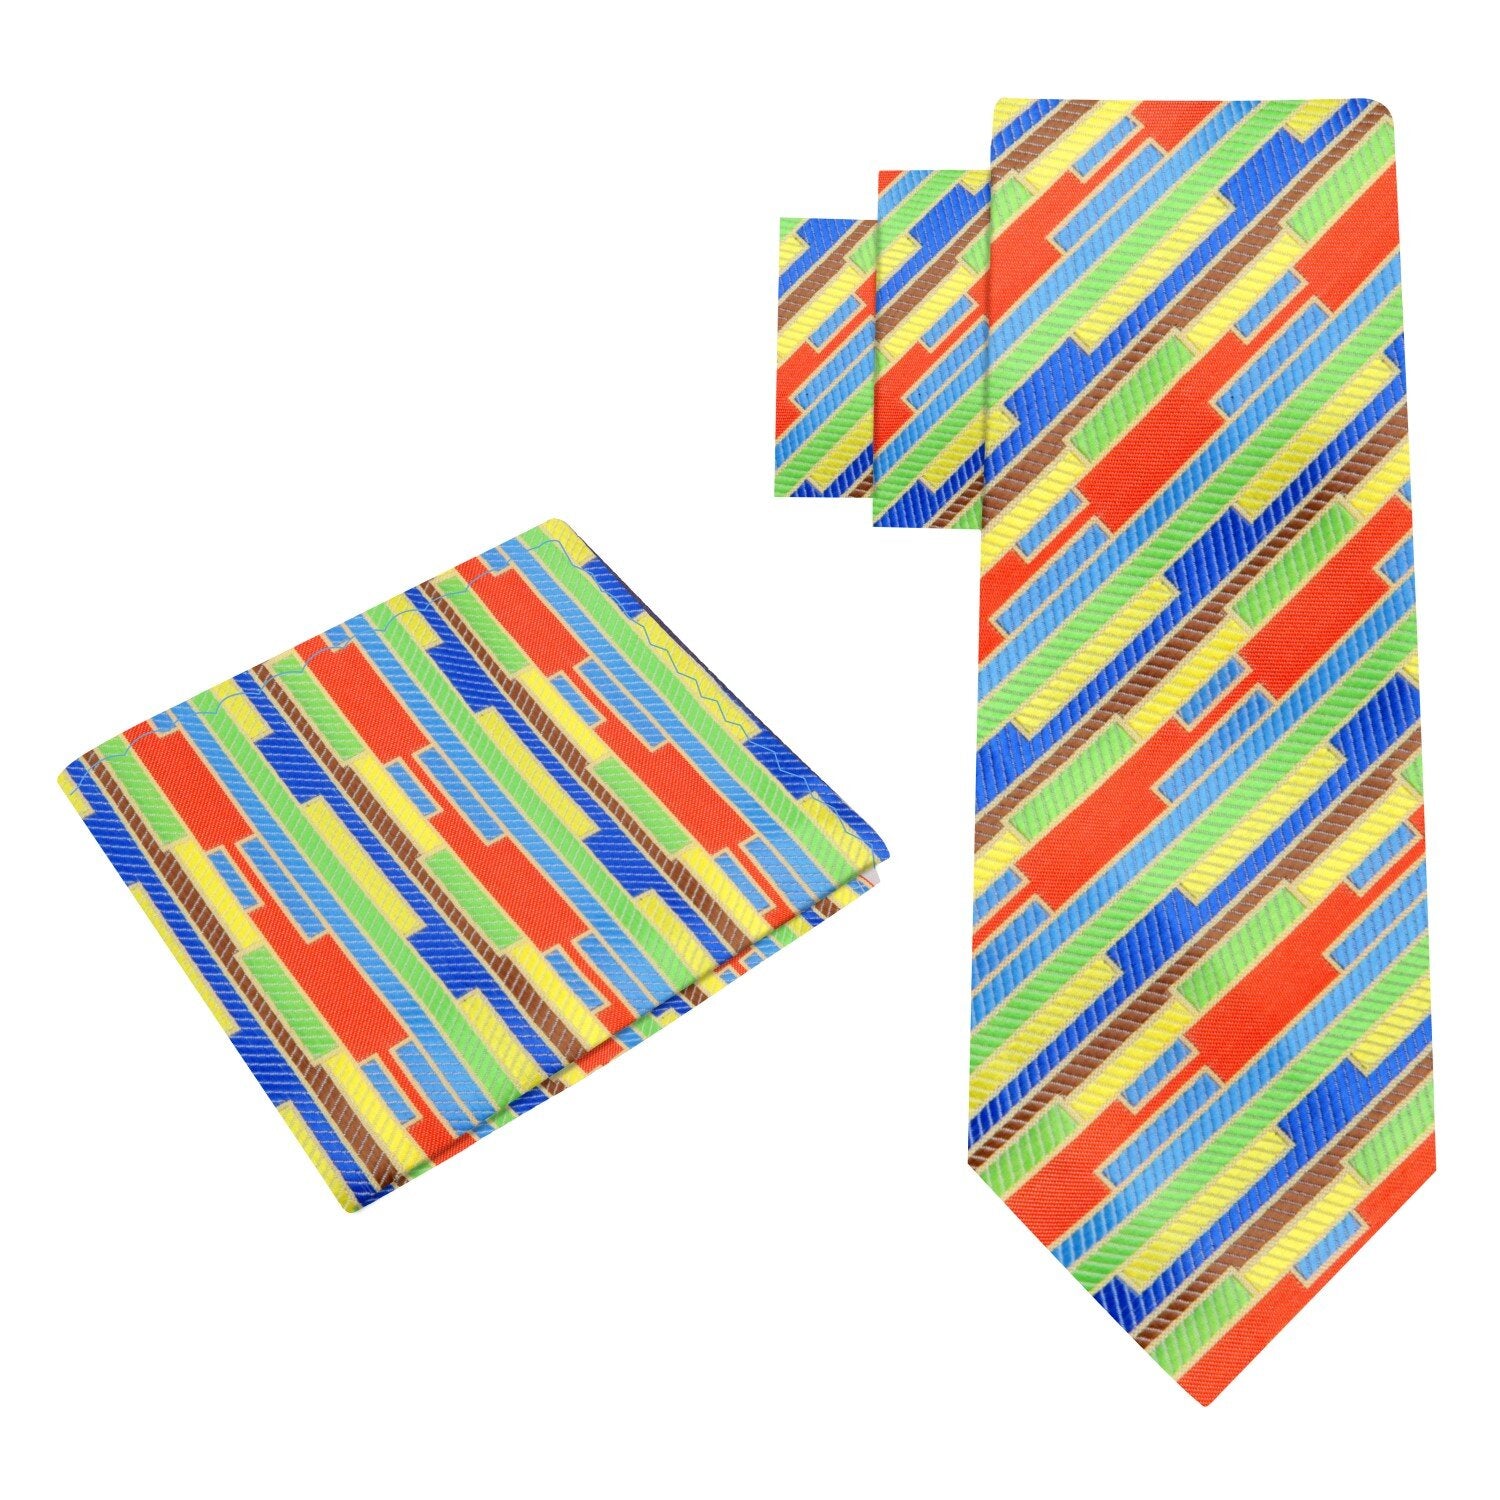 Alt View: Yellow, Blue, Green, Orange Abstract Stripe Tie and Pocket Square